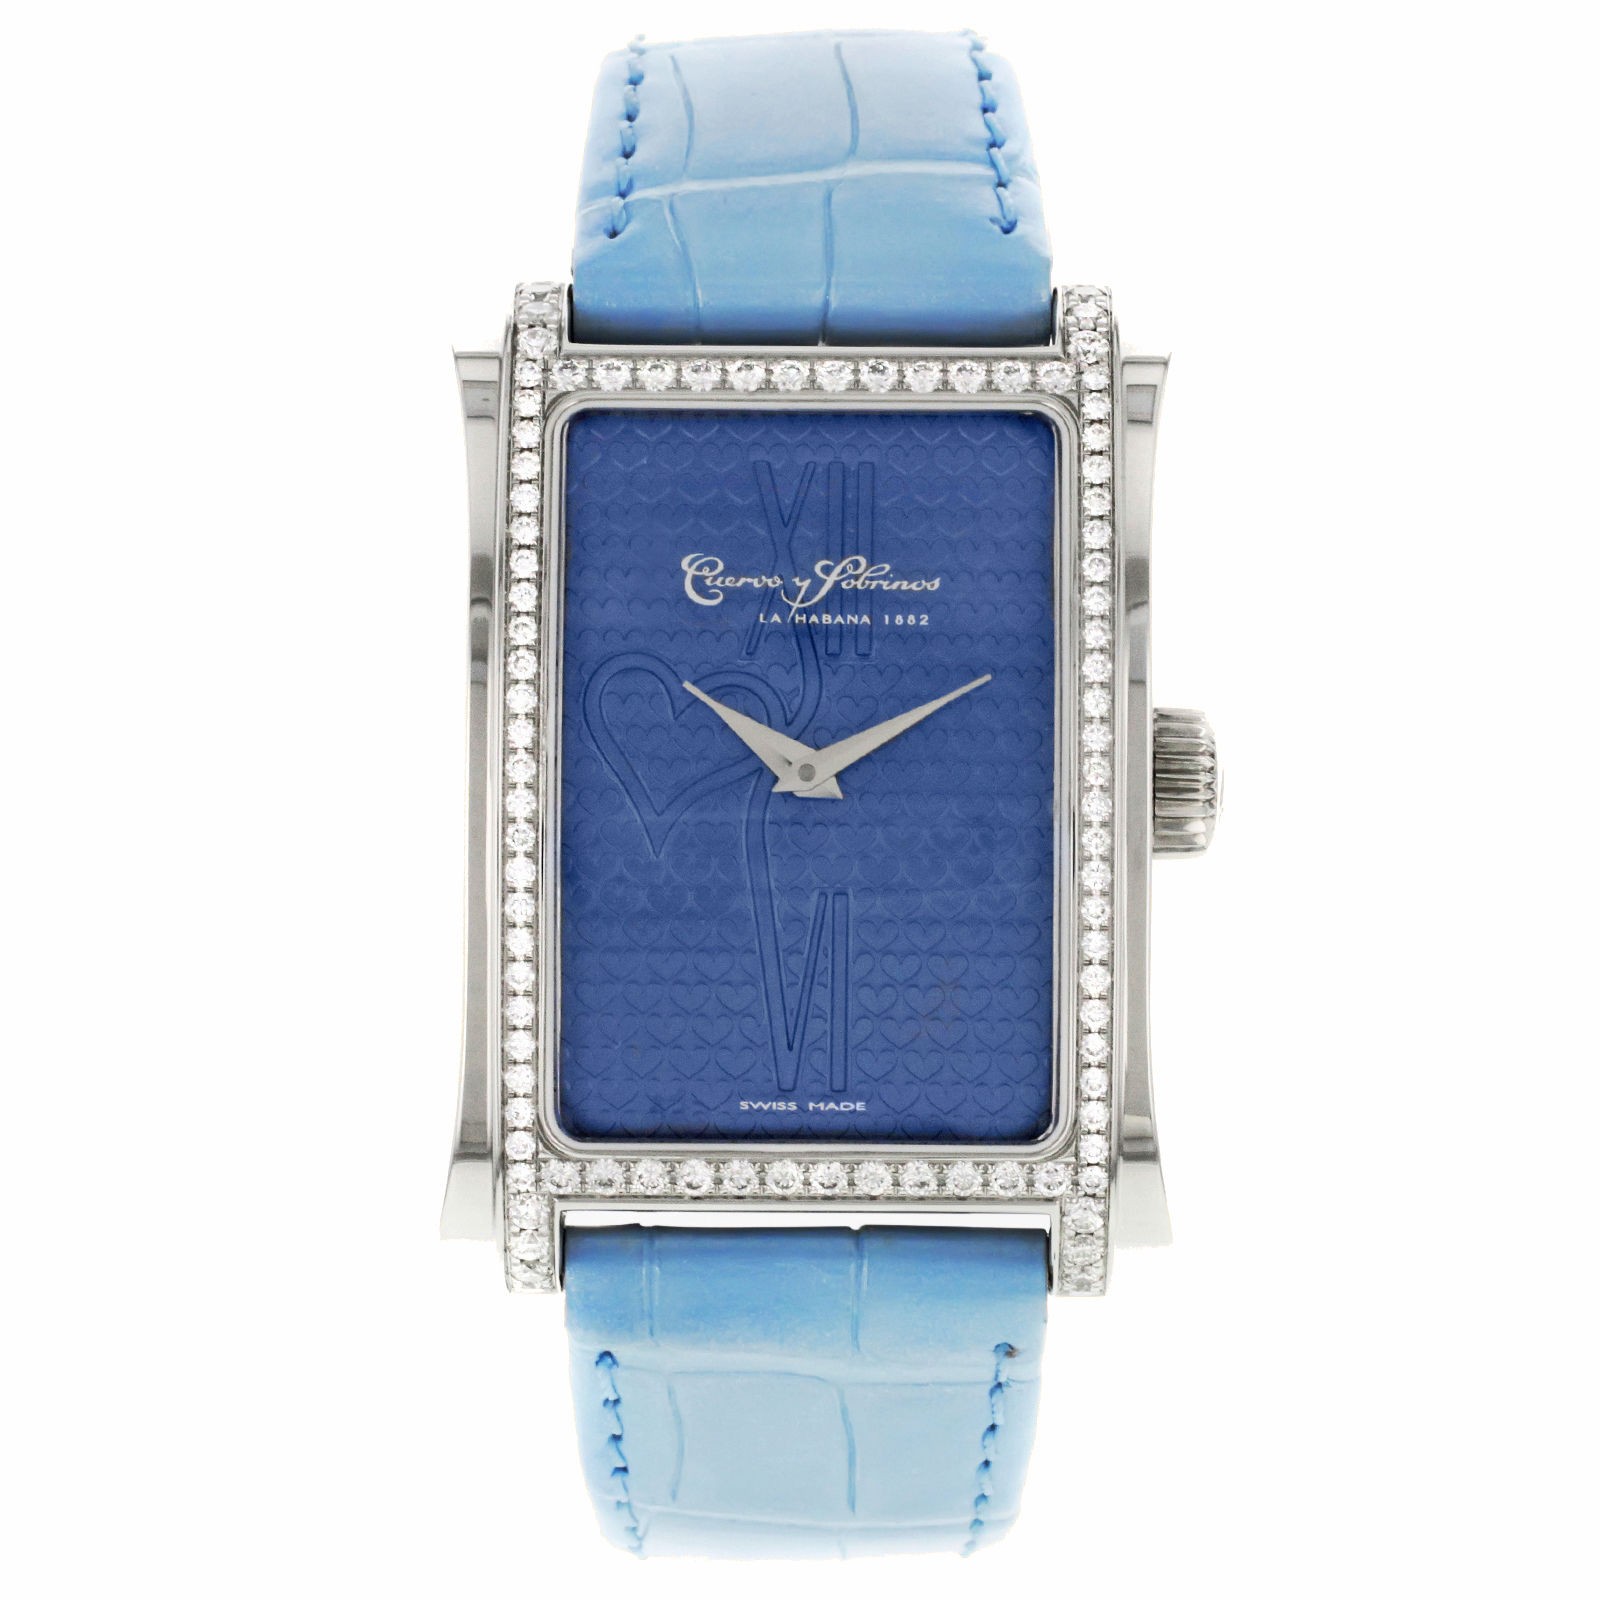 Sobrinos Prominente 28mm Automatic in Steel on Blue Leather Strap with Blue Dial